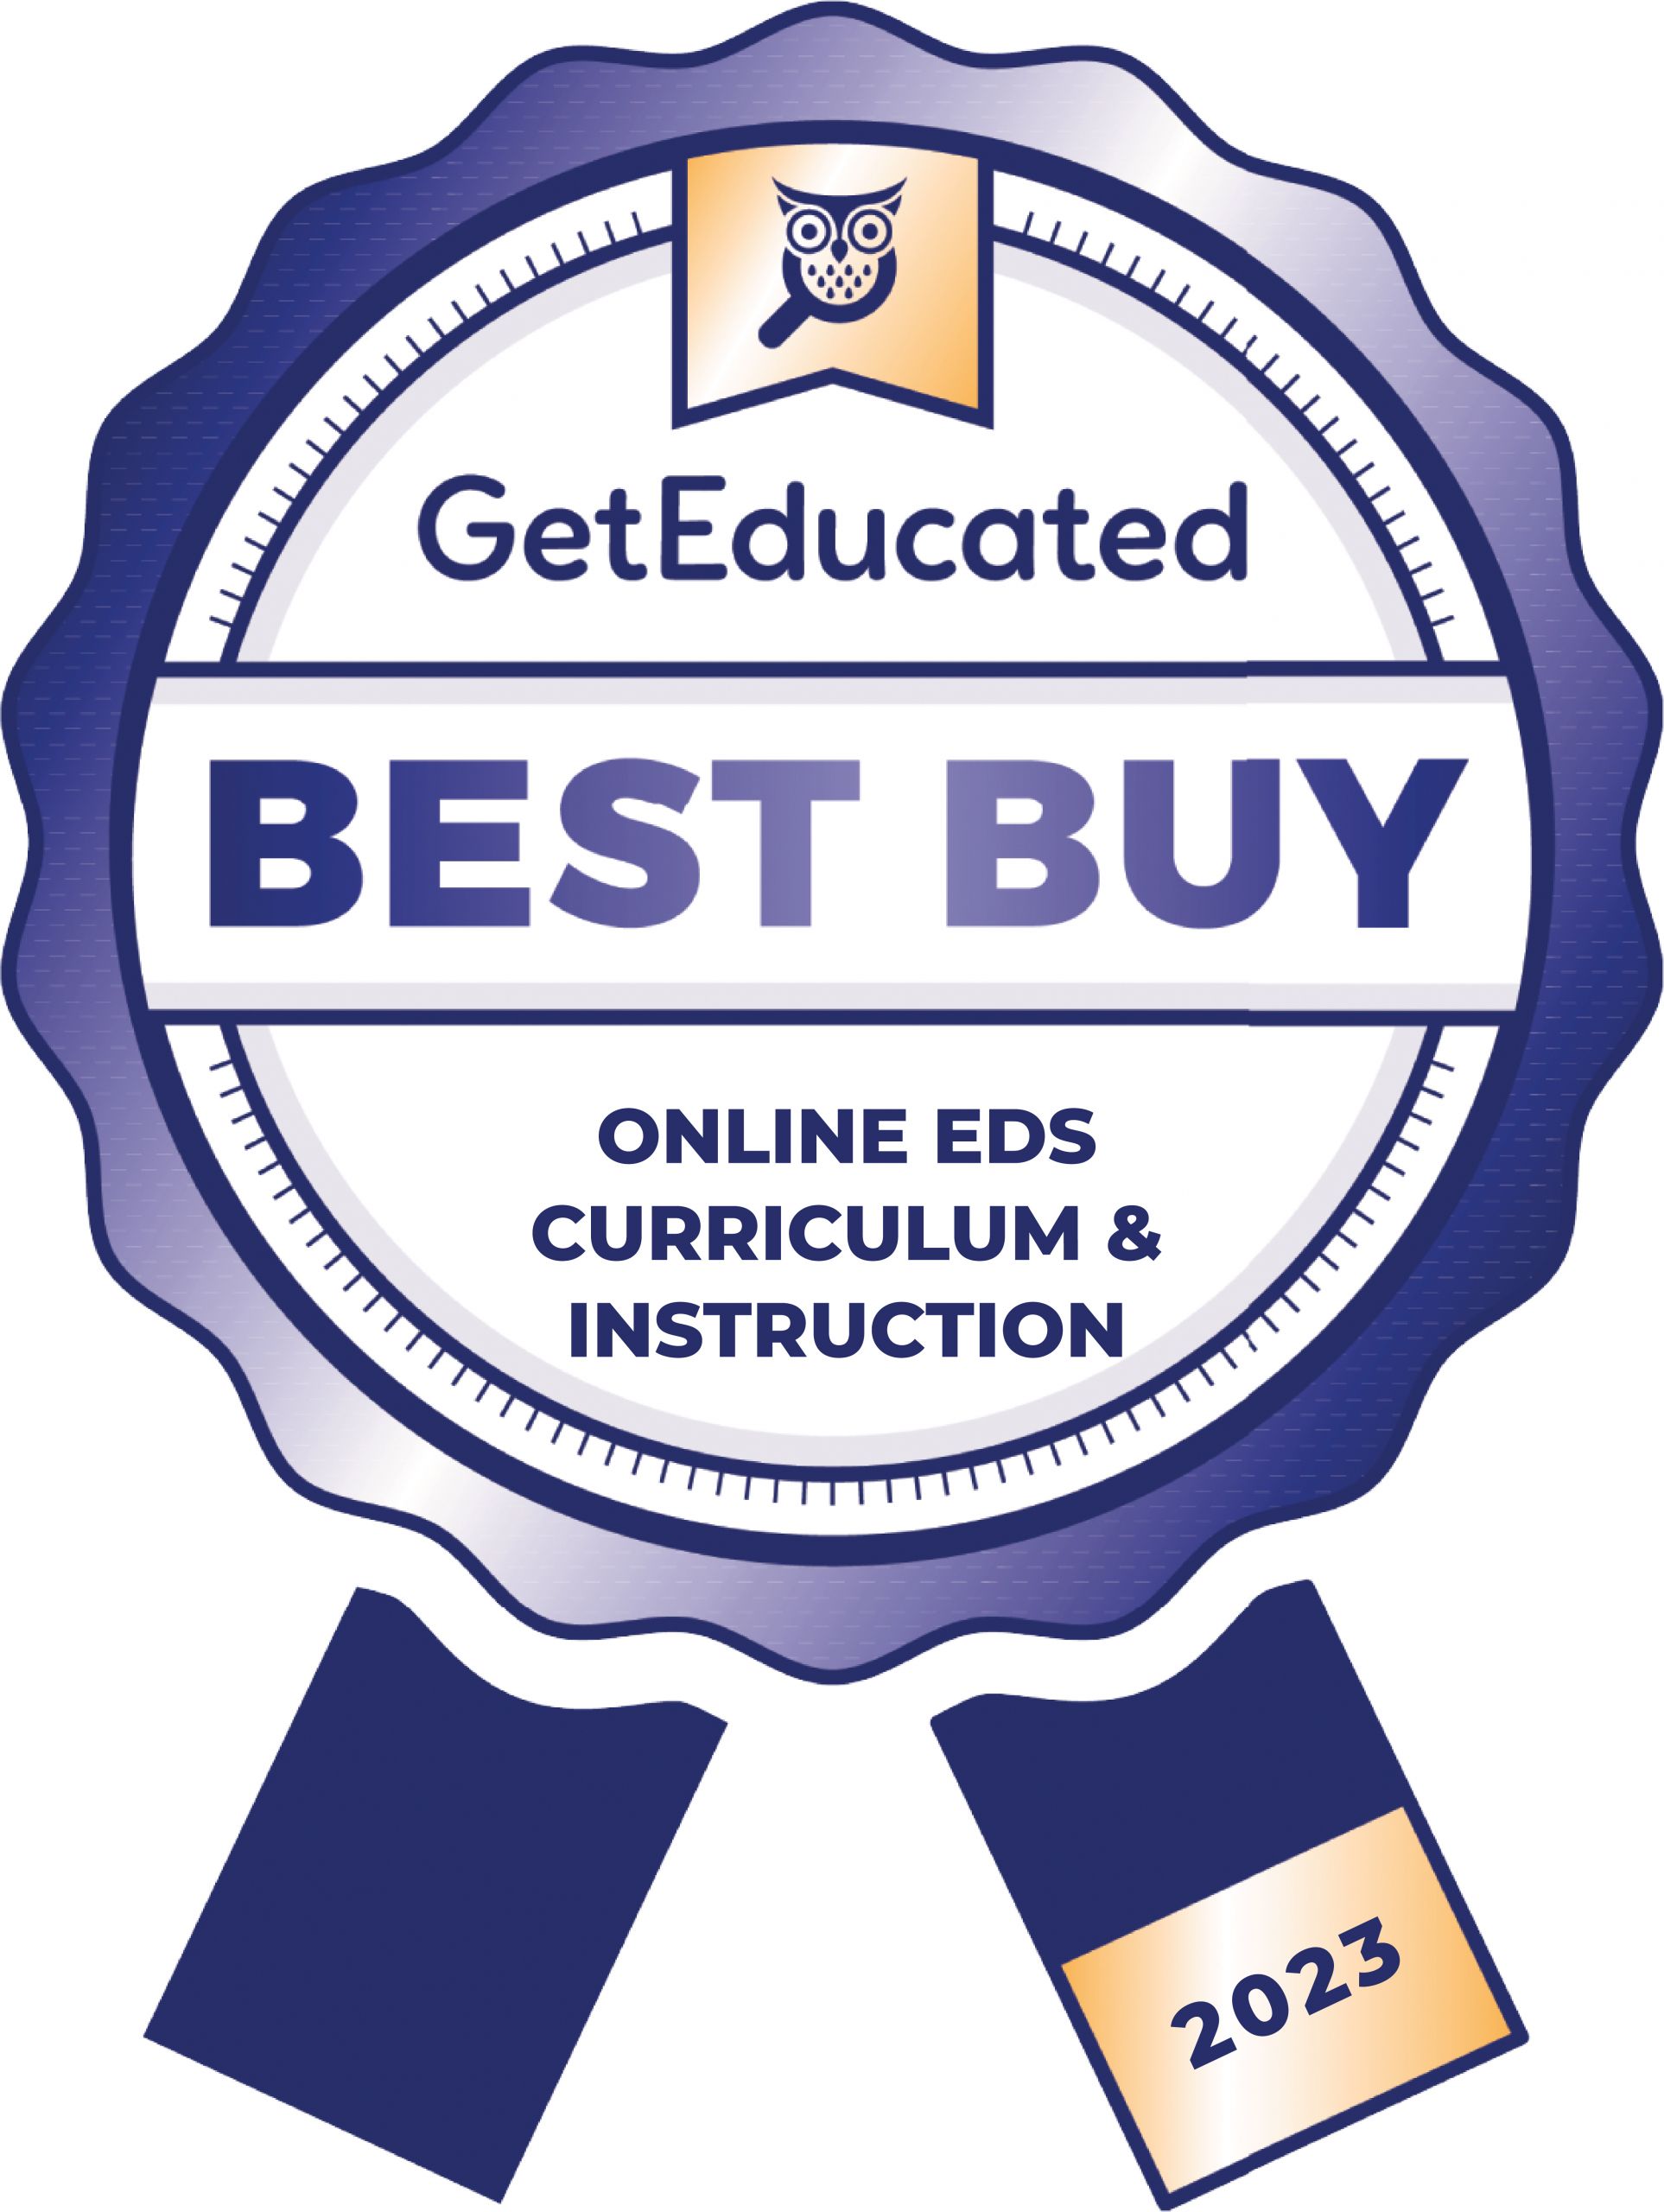 Rankings of the cheapest EdS curriculum and instruction online programs